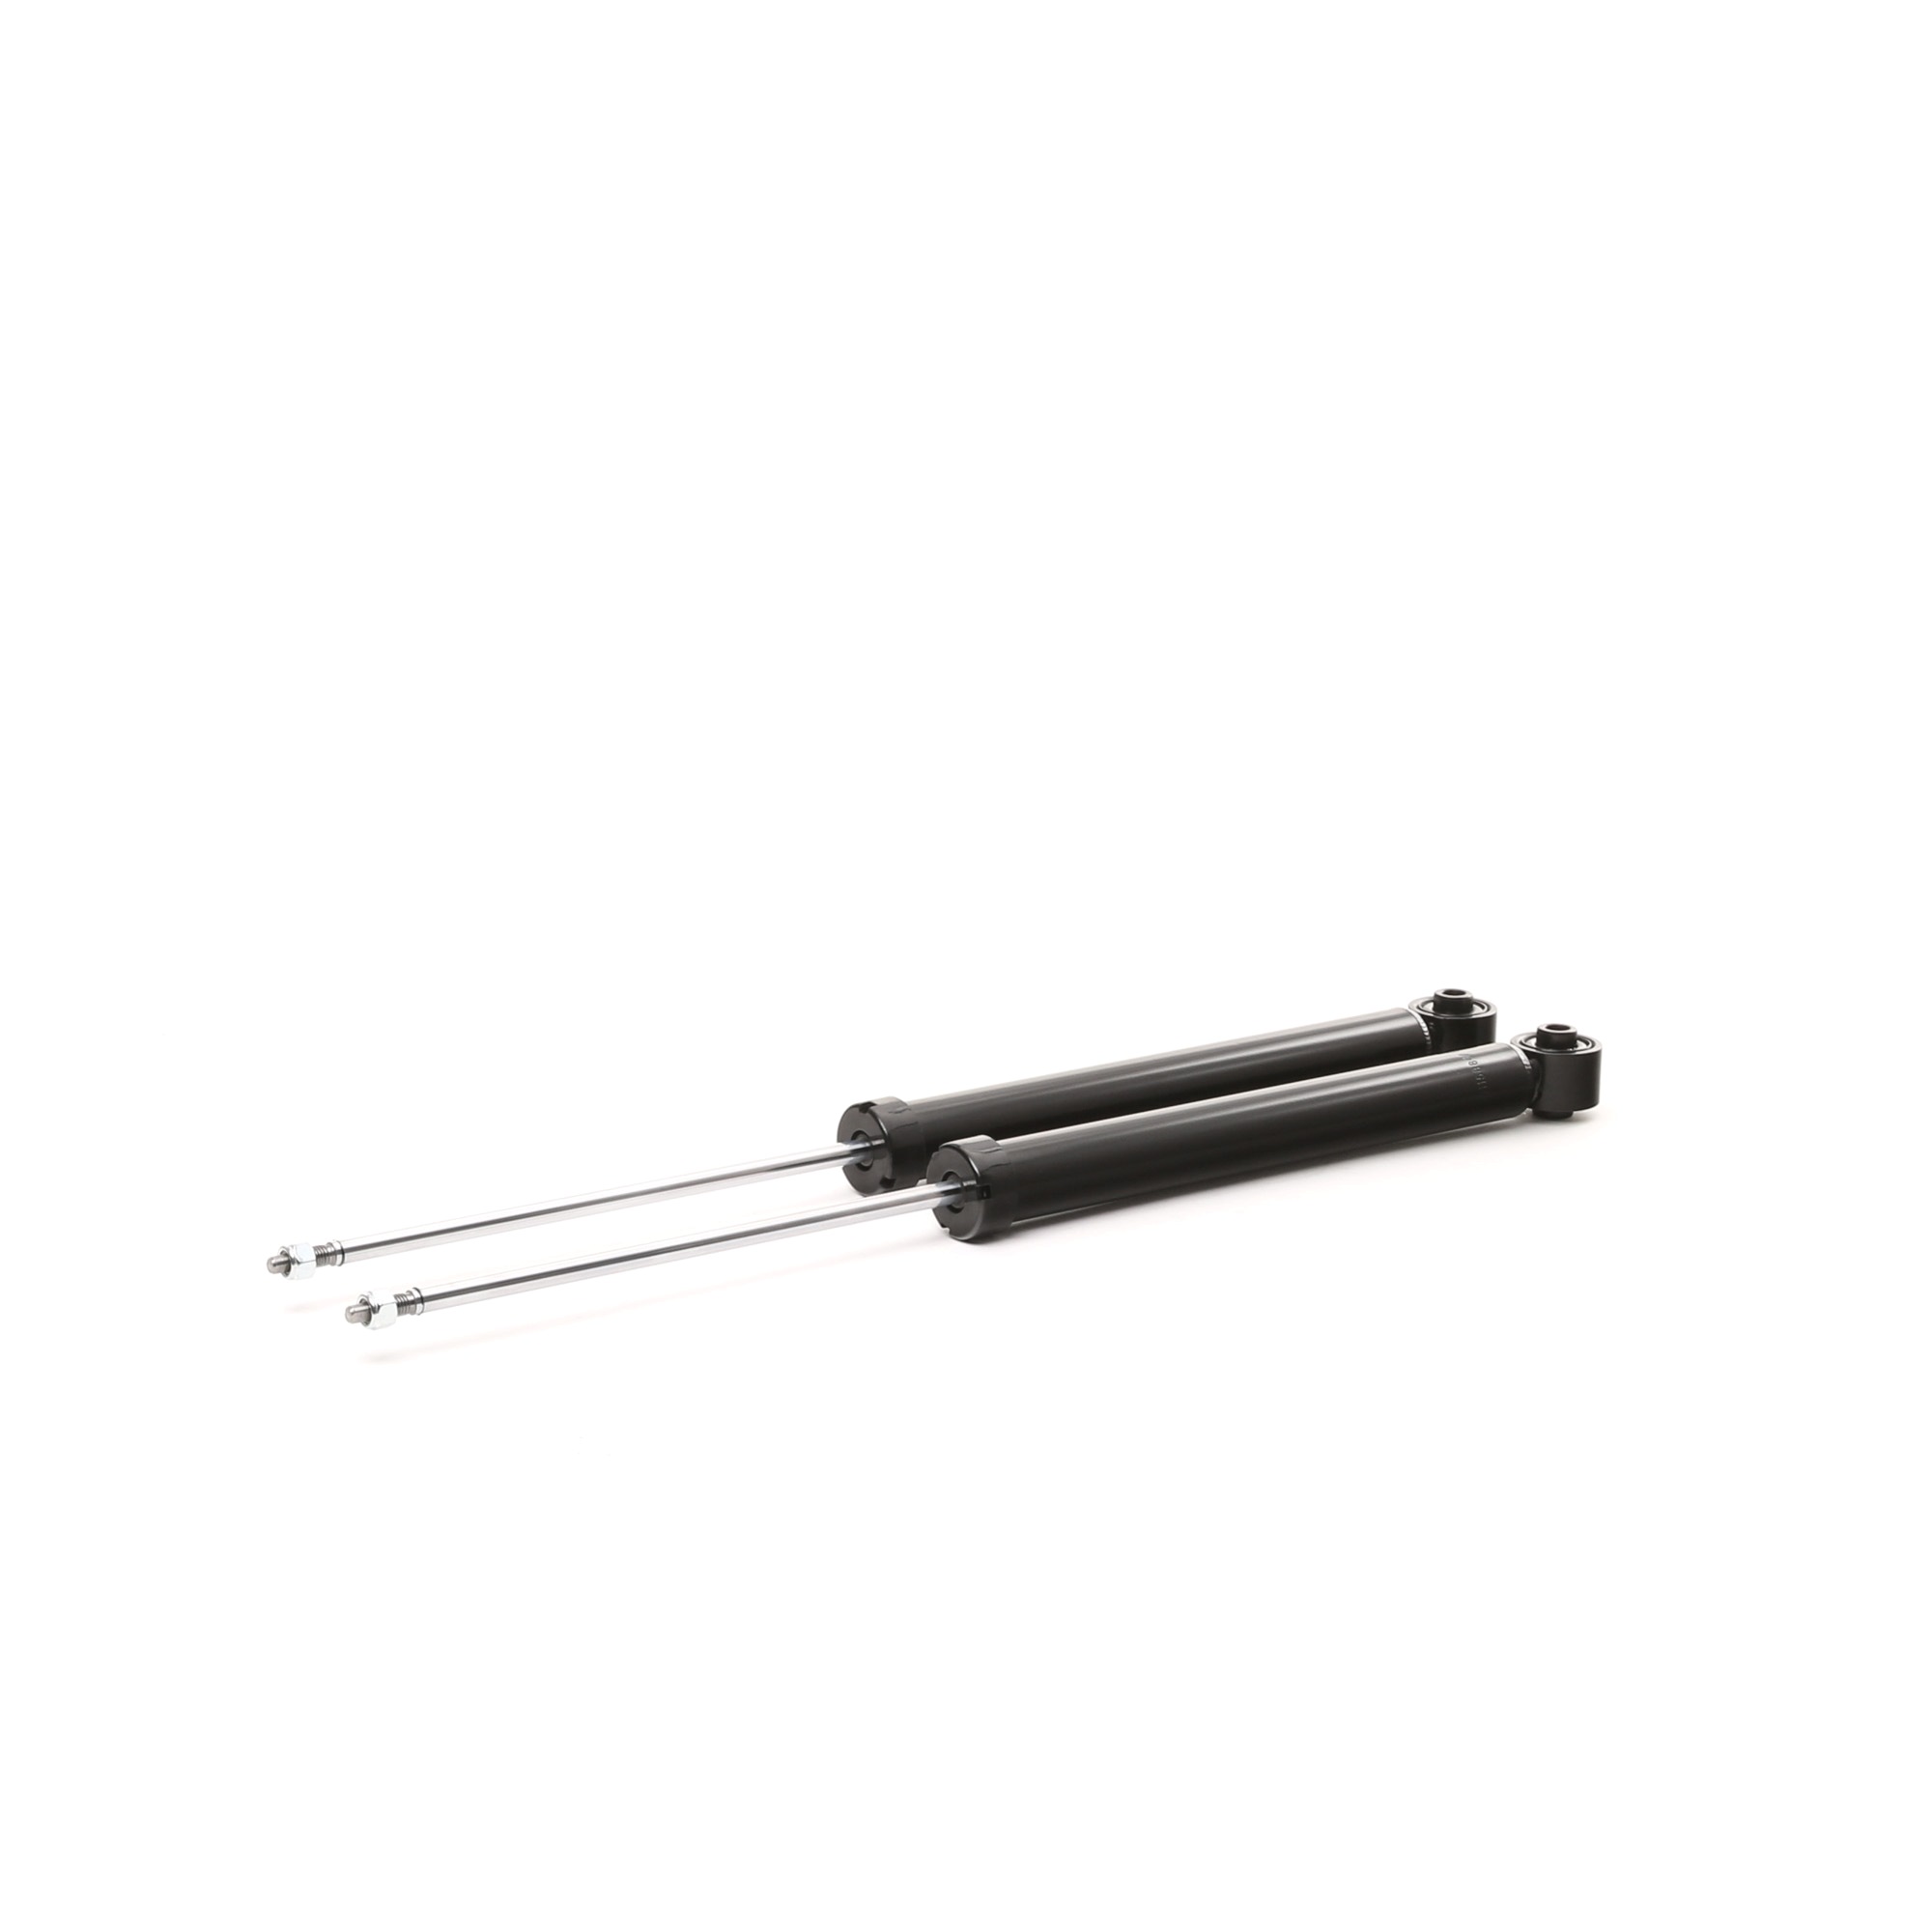 STARK Rear Axle, Gas Pressure, Twin-Tube, Absorber does not carry a spring, Telescopic Shock Absorber, Top pin, Bottom eye Shocks SKSA-0133223 buy